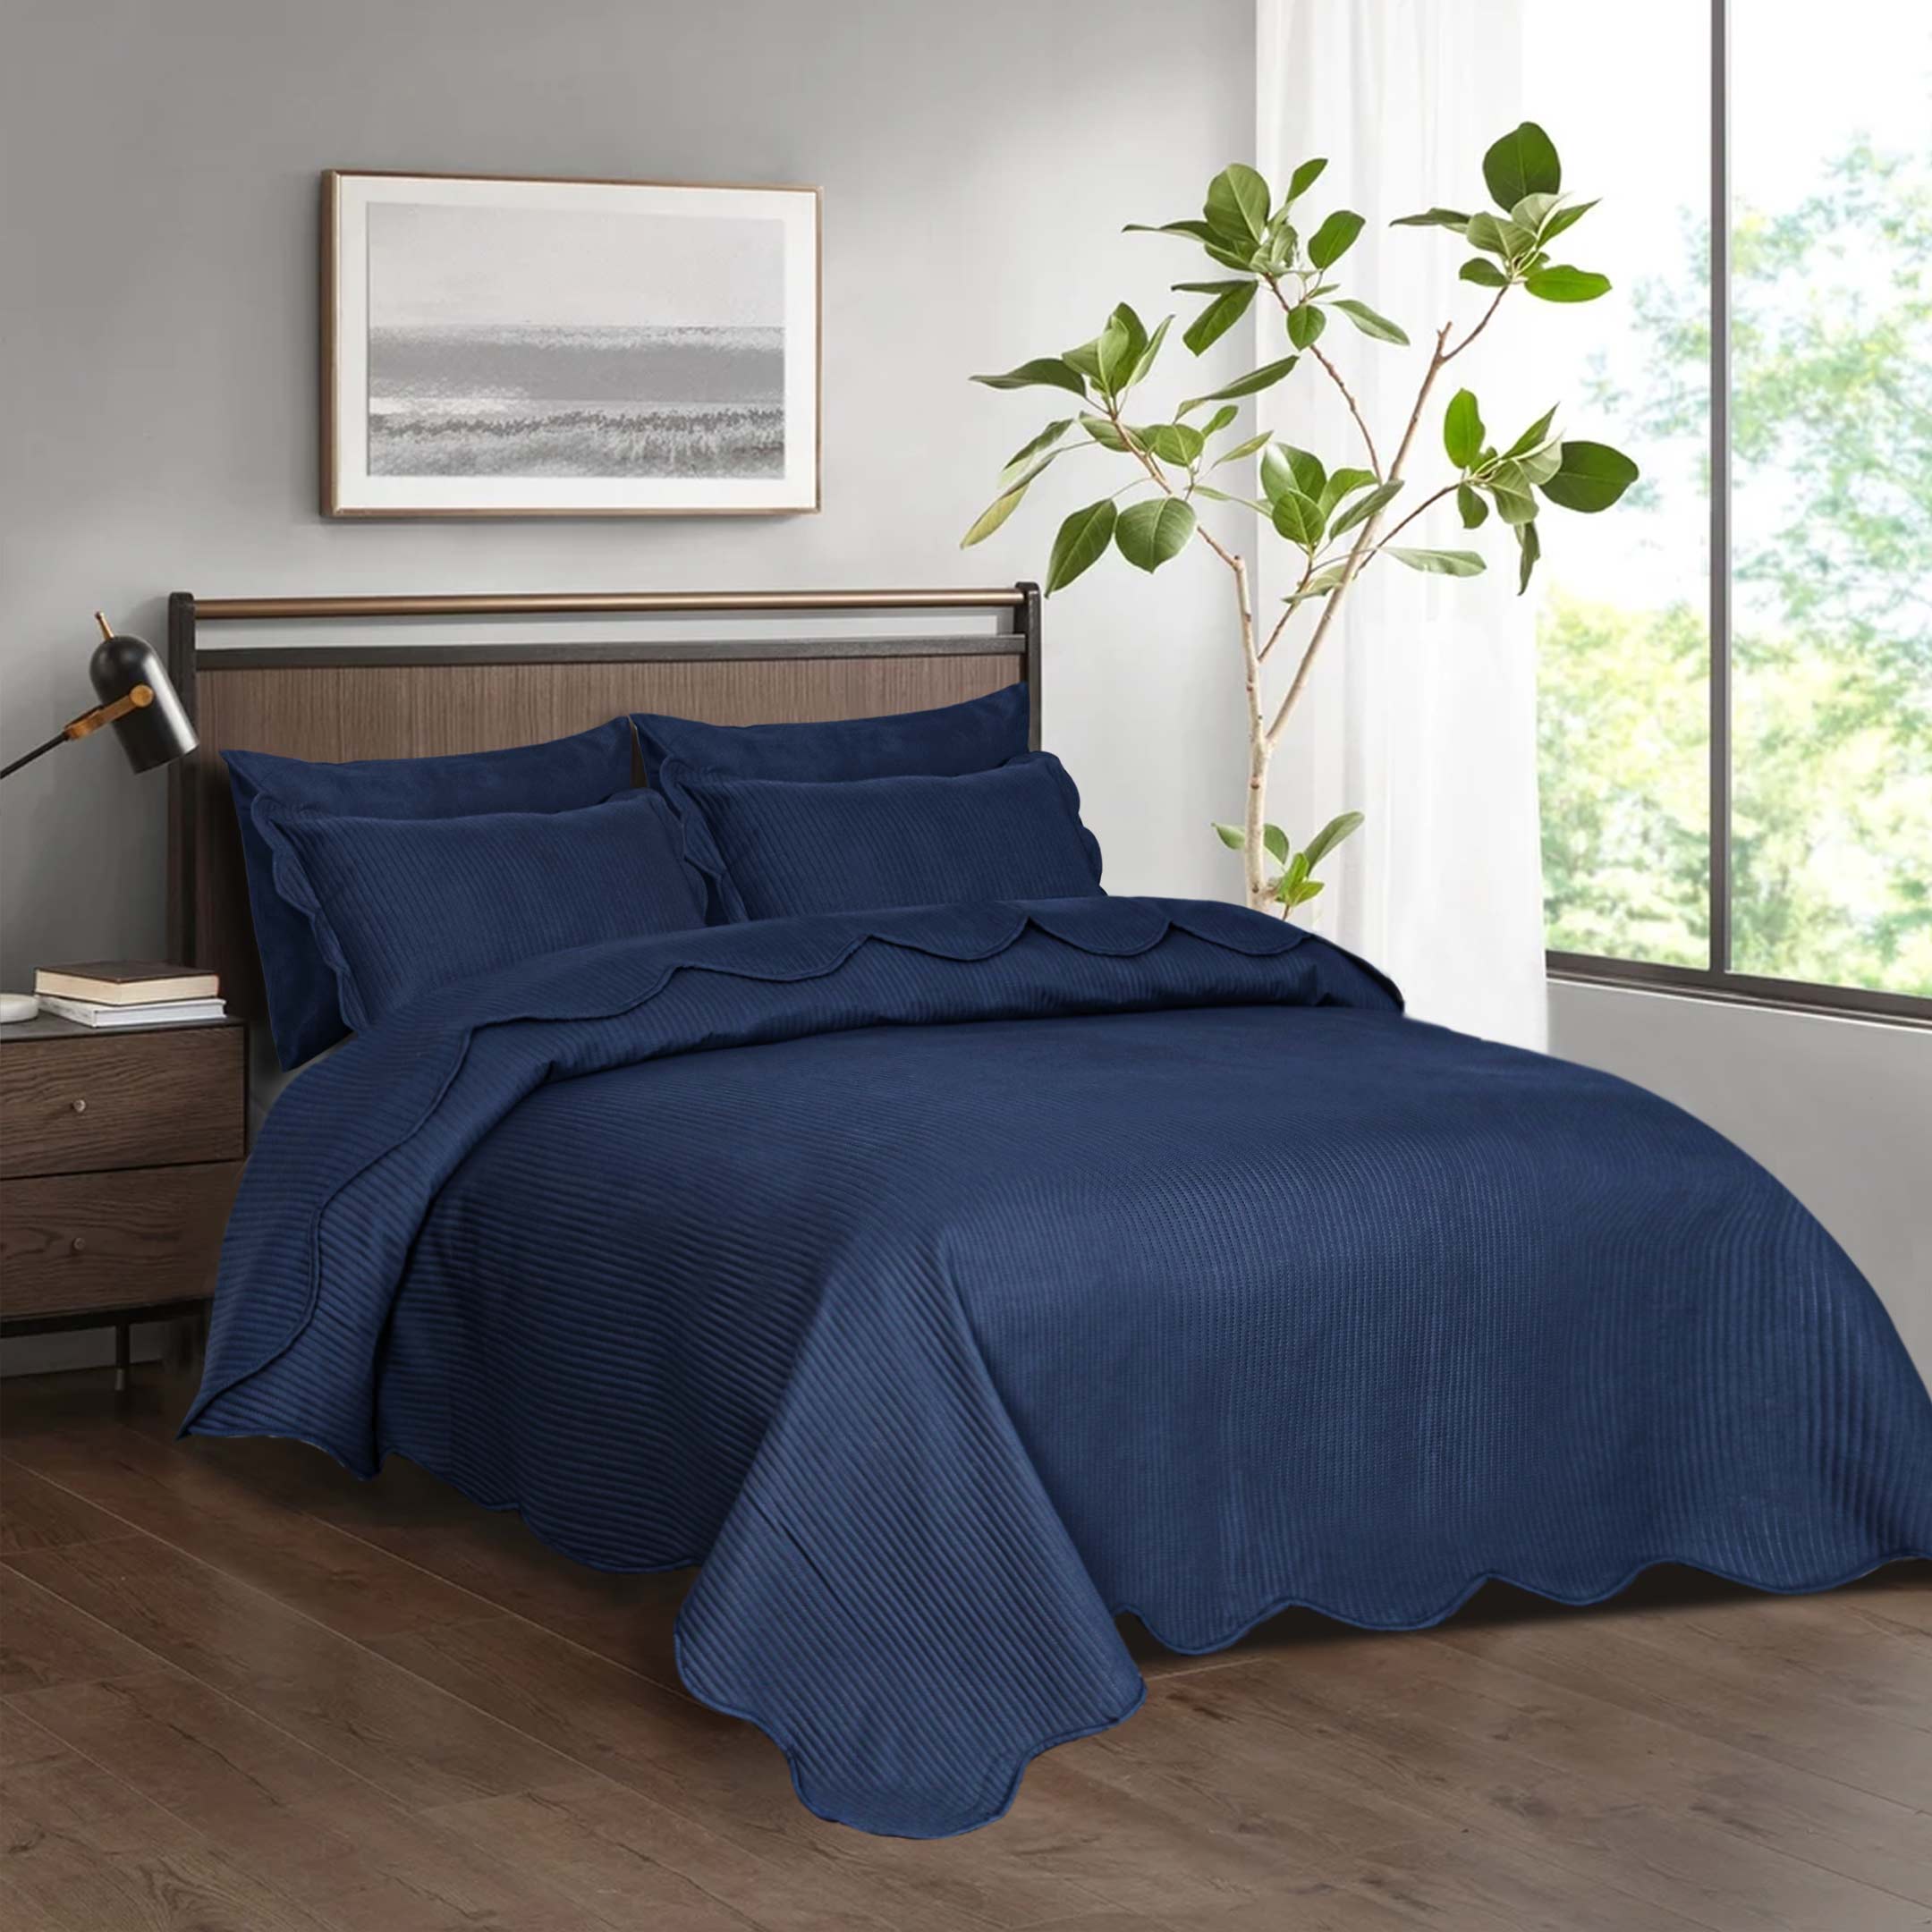 Line Embossed Ultrasonic Quilted Bedspread 6 pcs Set Navy